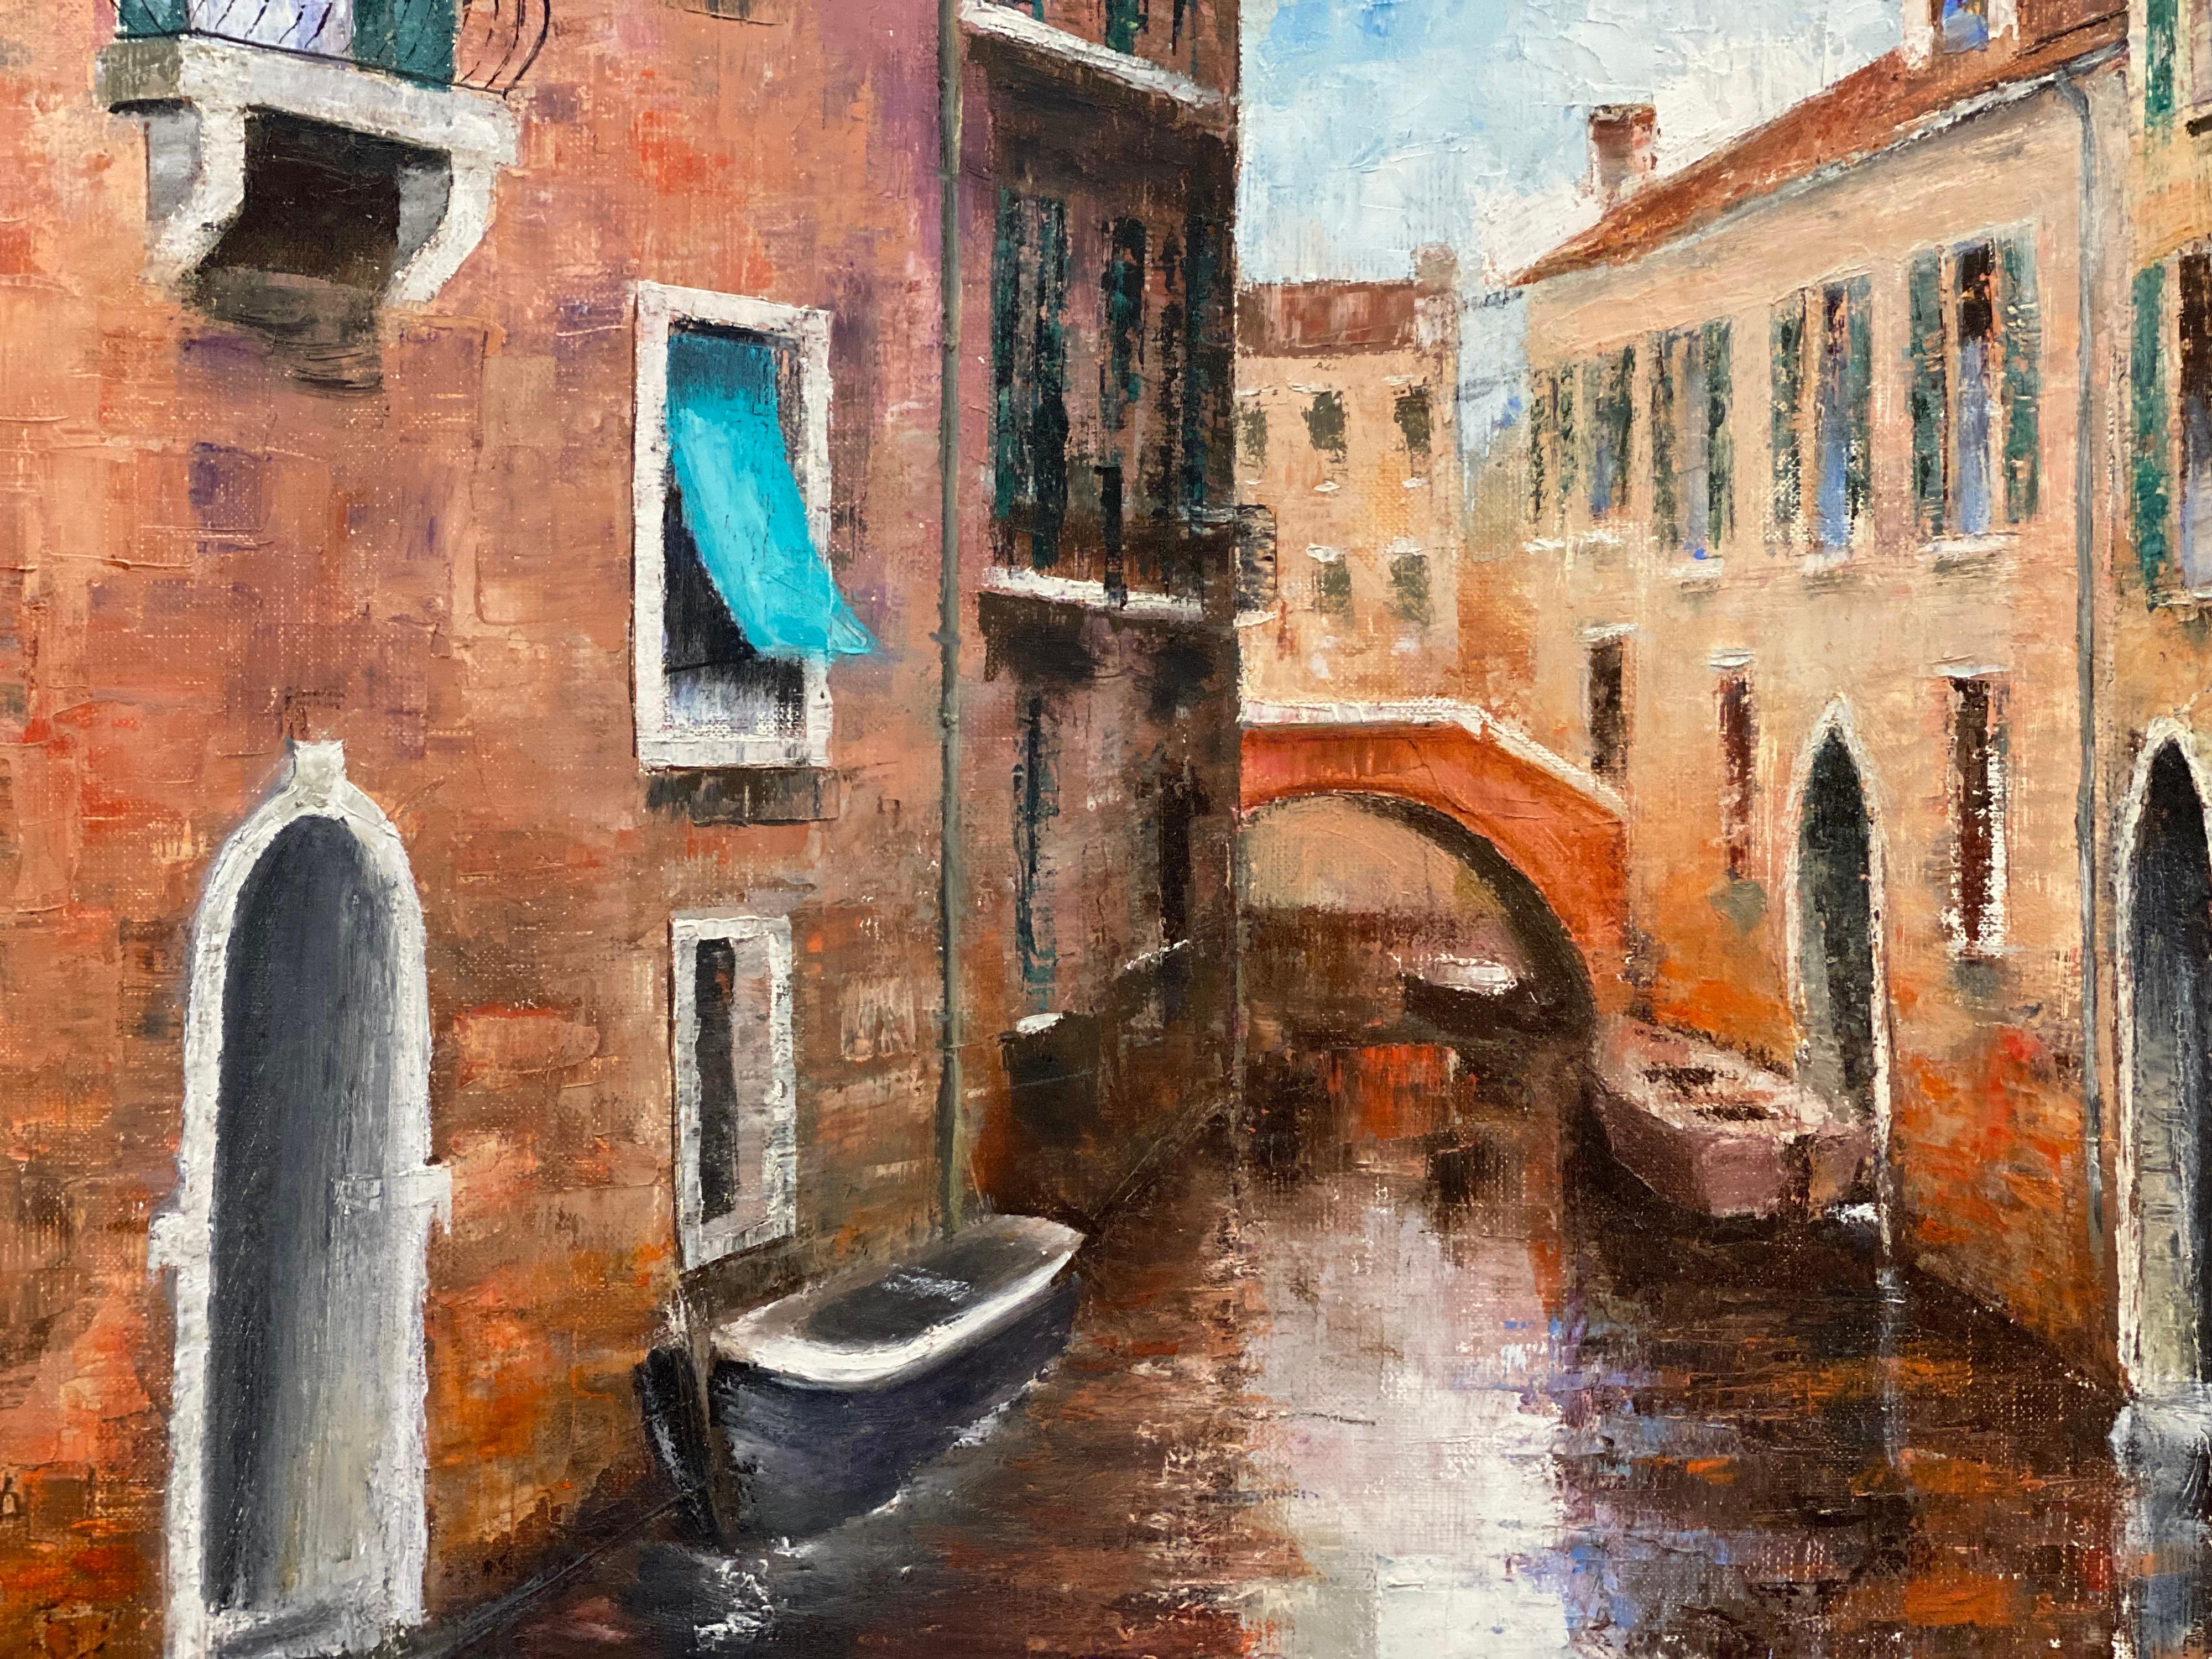 Venice Tranquil Canal backwater, original oil painting on canvas - Painting by LOUIS DEL BIANCO (B.1925